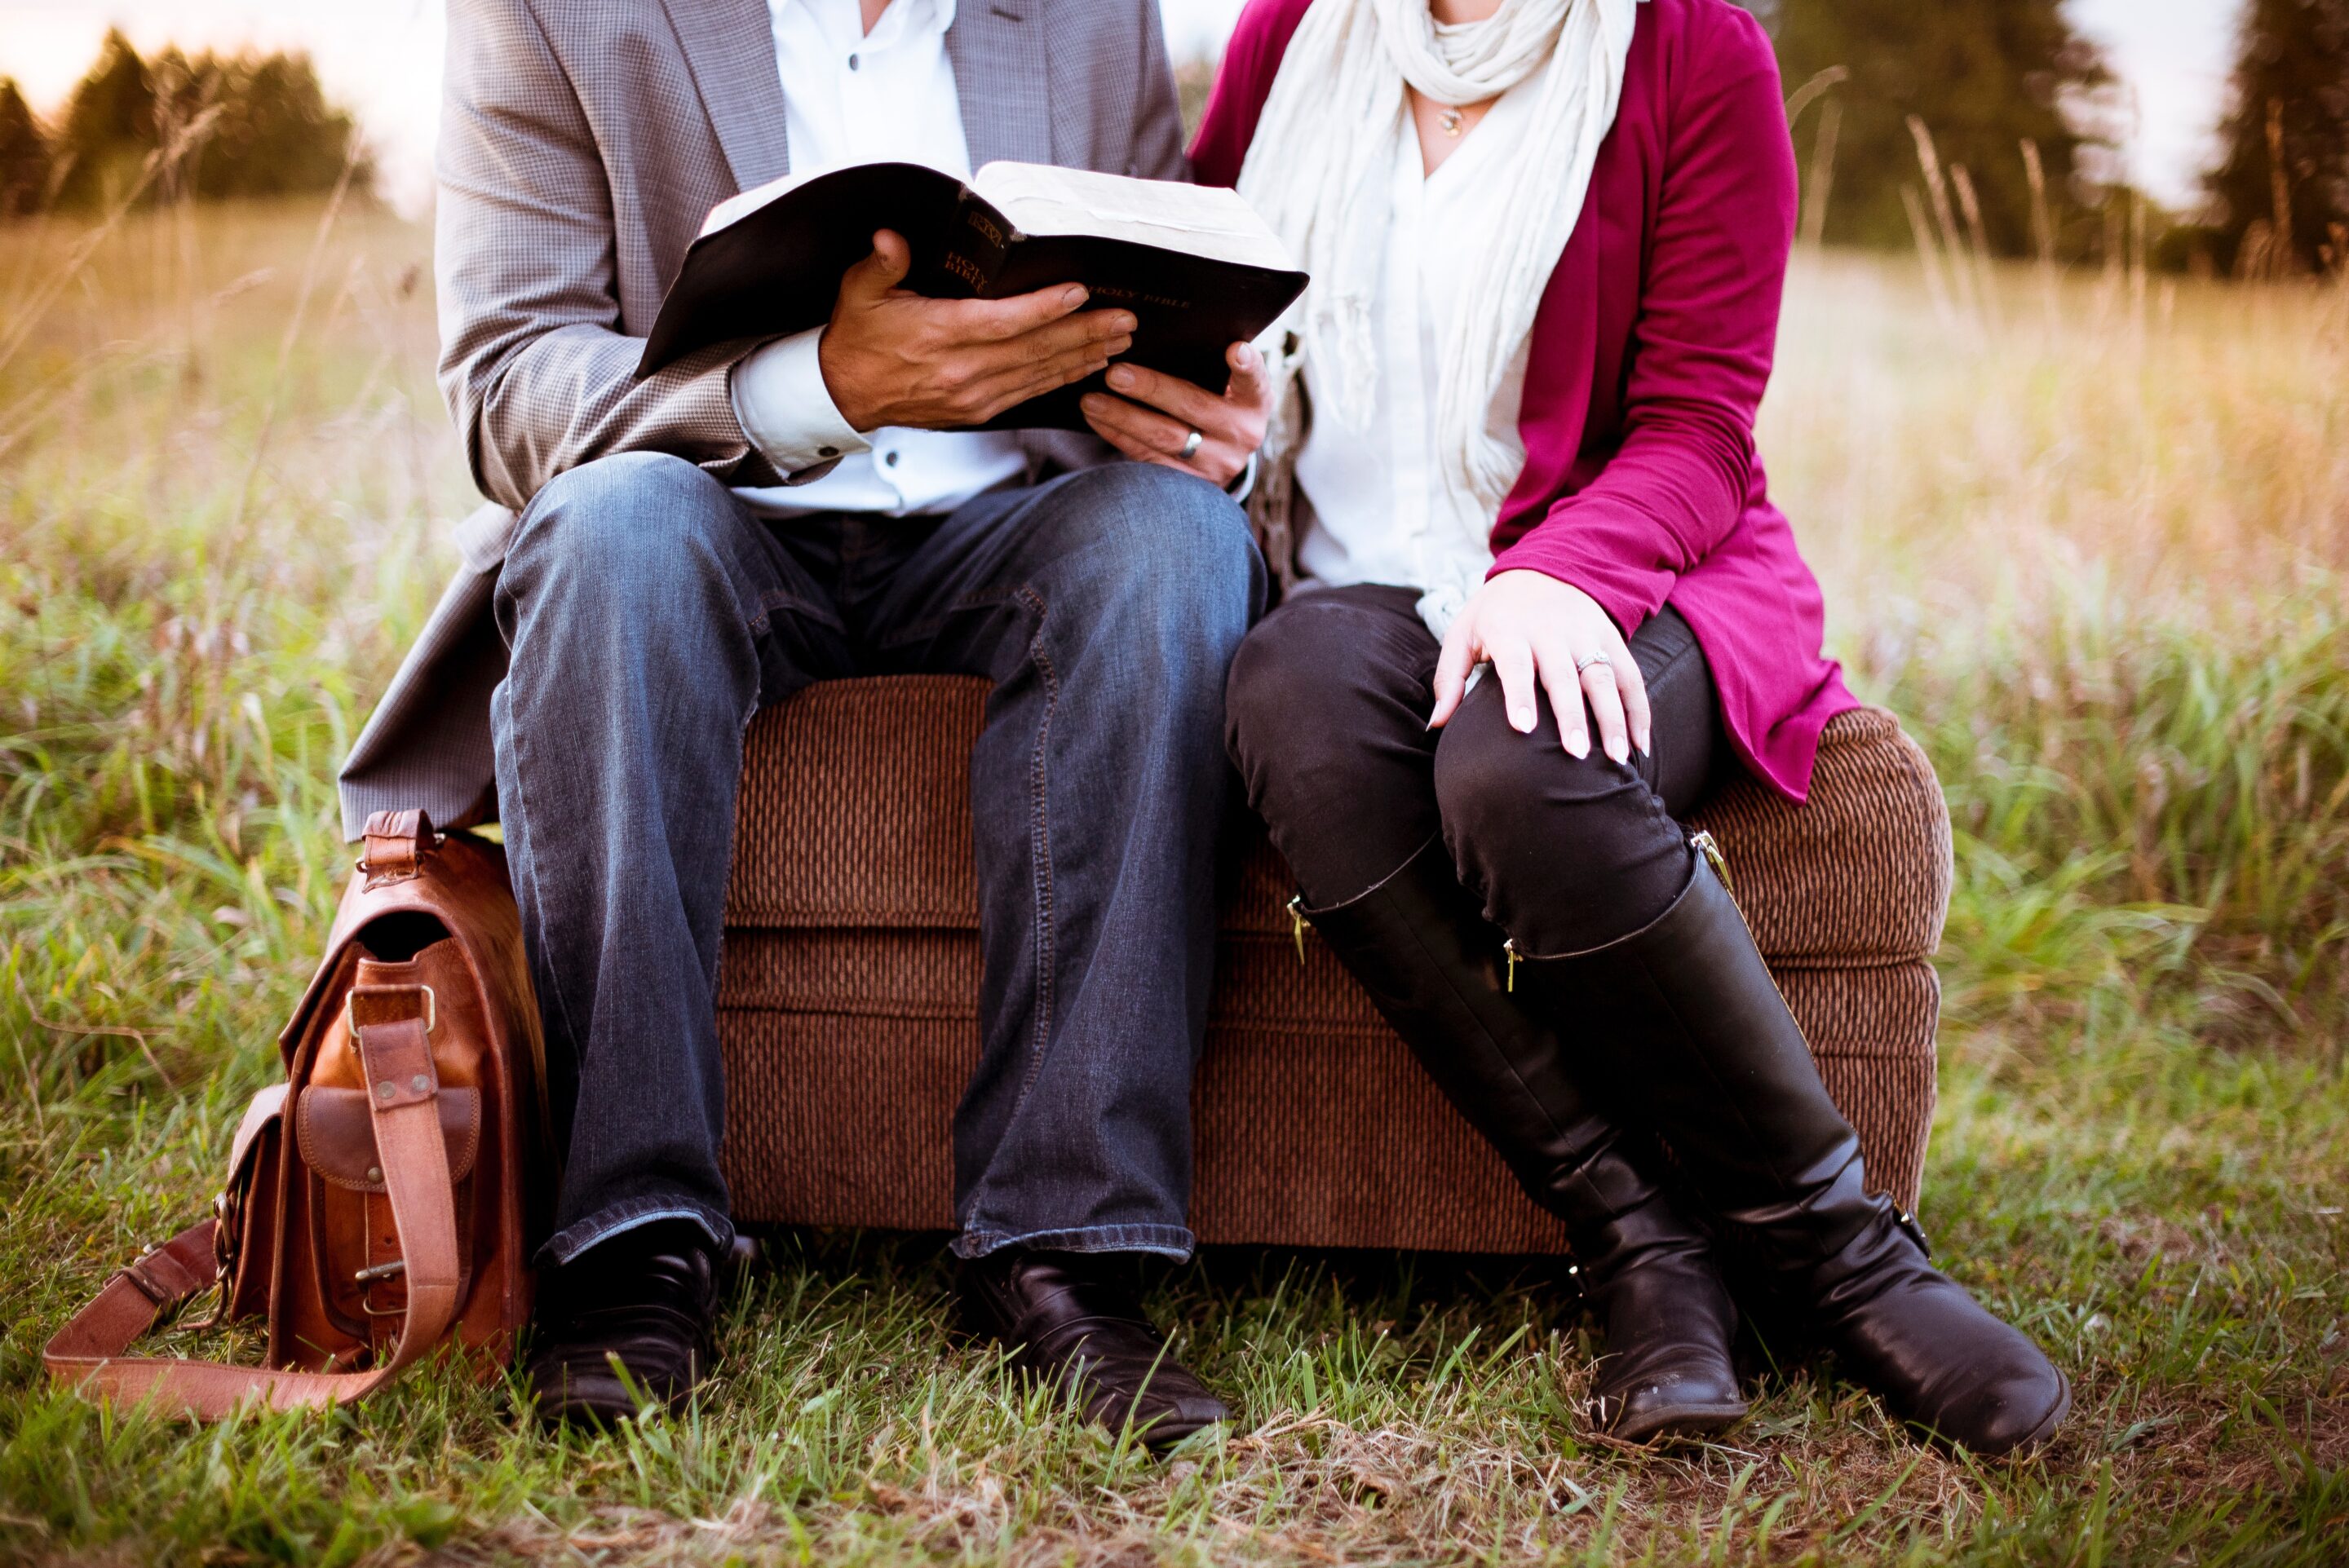 Couple studying the gospel together